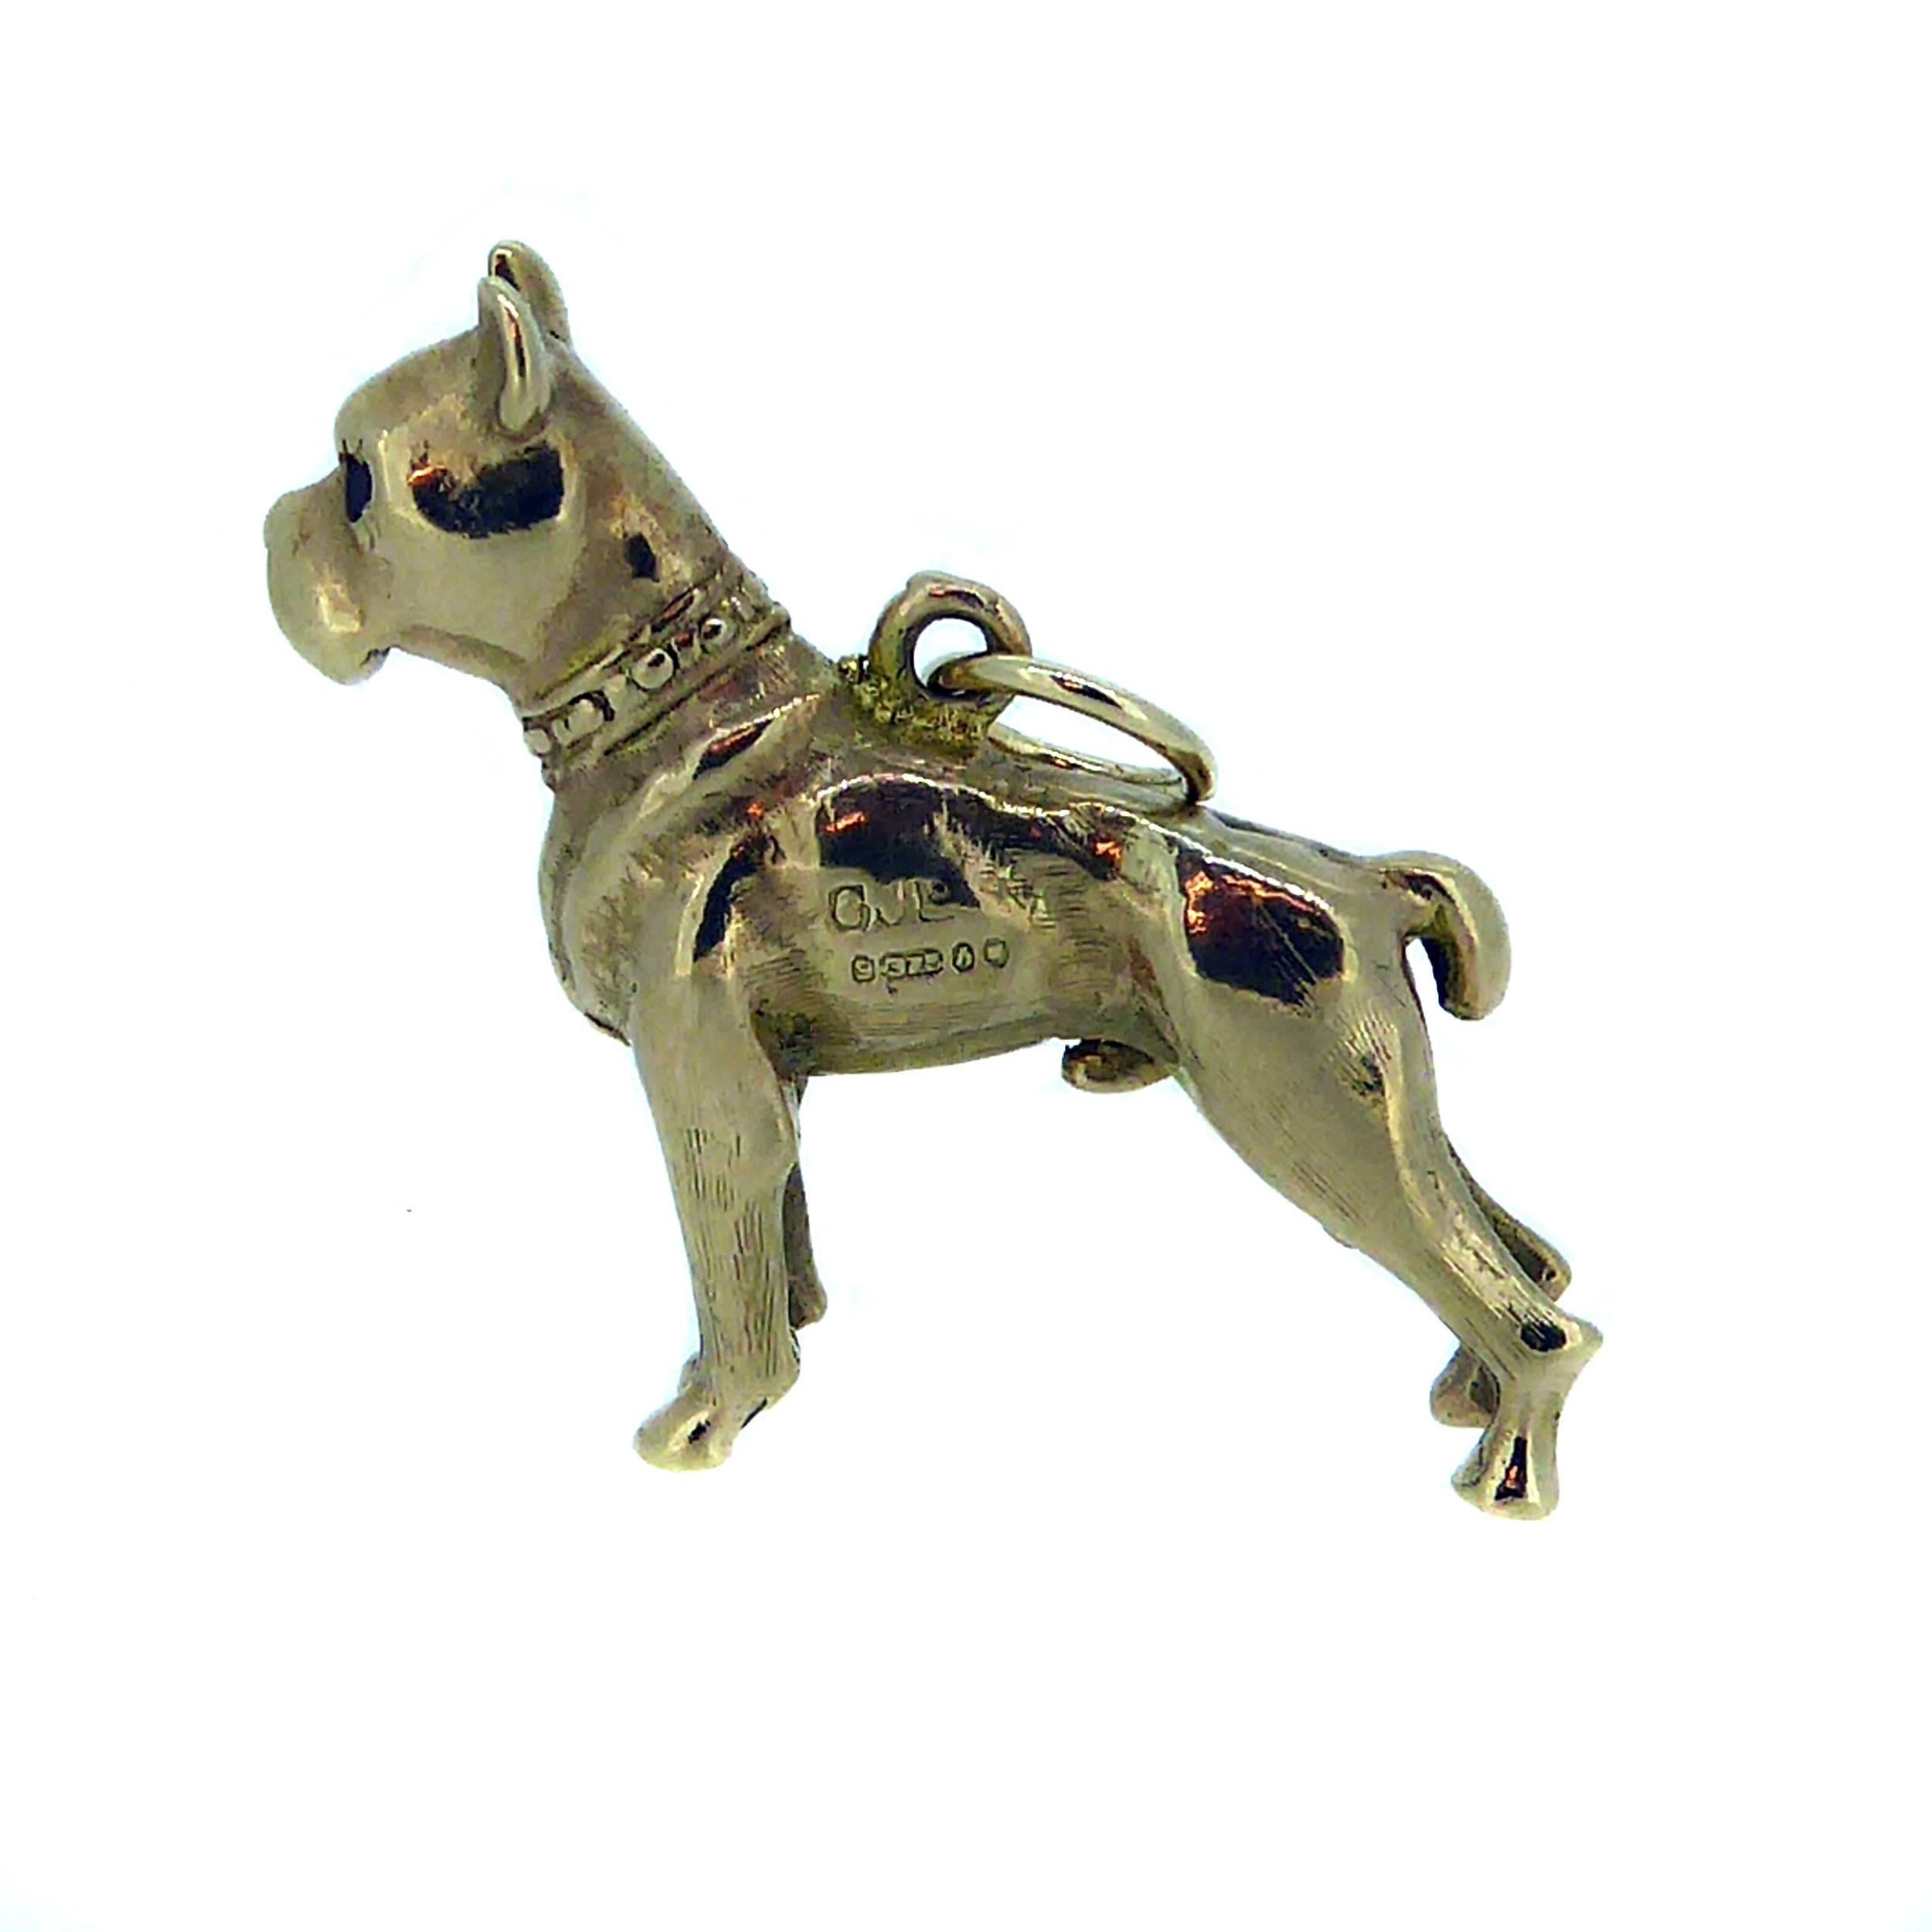 Vintage Boxer dog pendant expertly crafted in 9ct yellow gold and weighing a substantial 8.3gms, standing proud with a show-ring-worthy en-pointe stance.  Extremely well detailed in all forms from the tips of his ears to his paws, he has ruby eyes